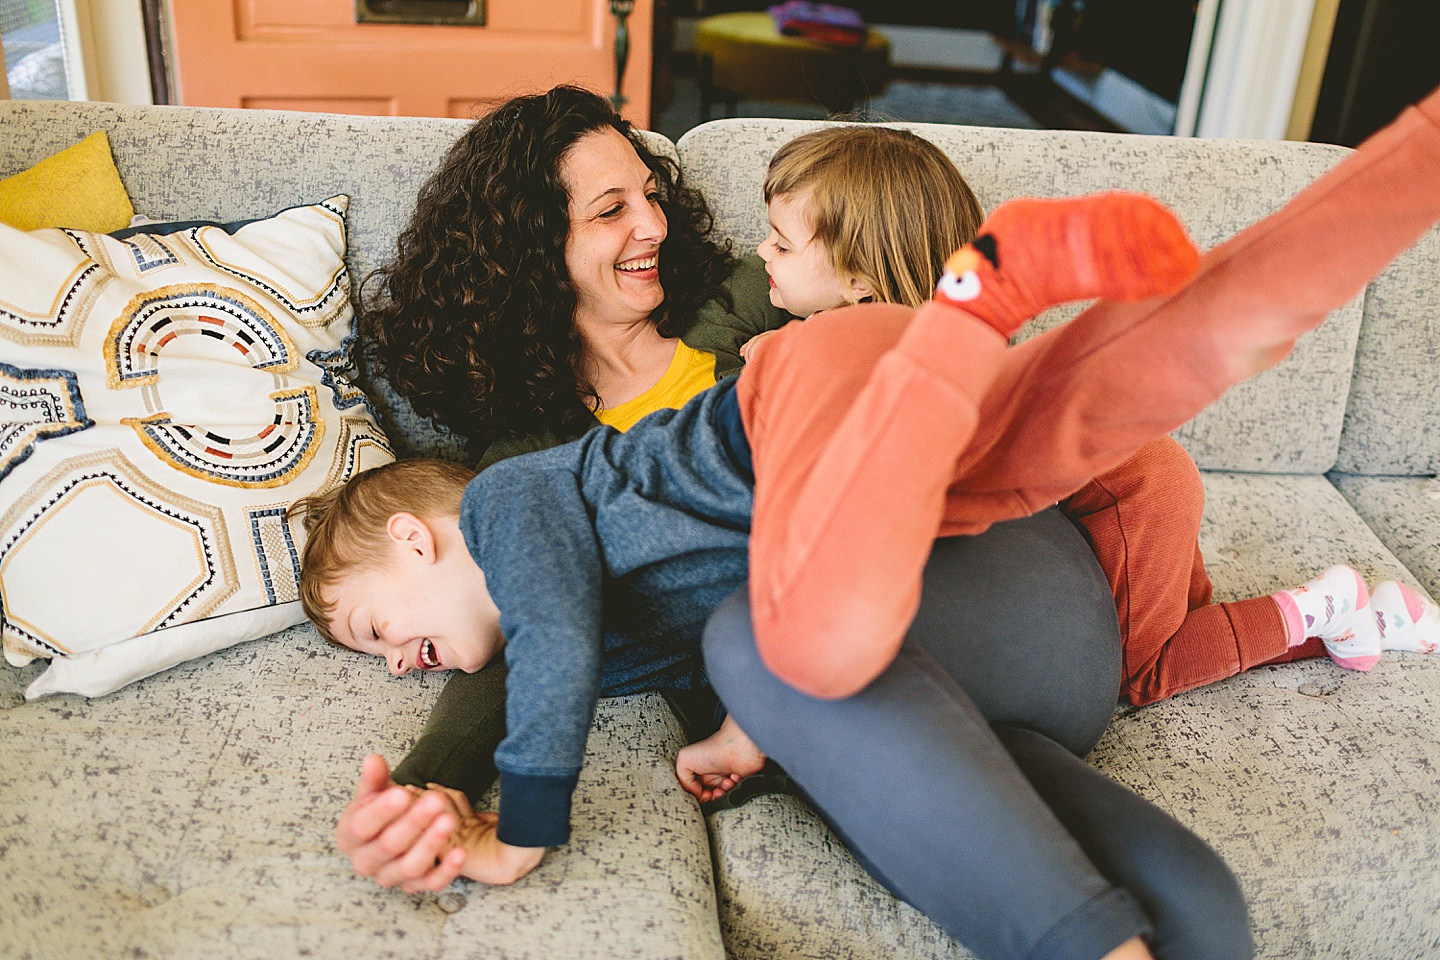 Mom wrestling with kids on couch and laughing